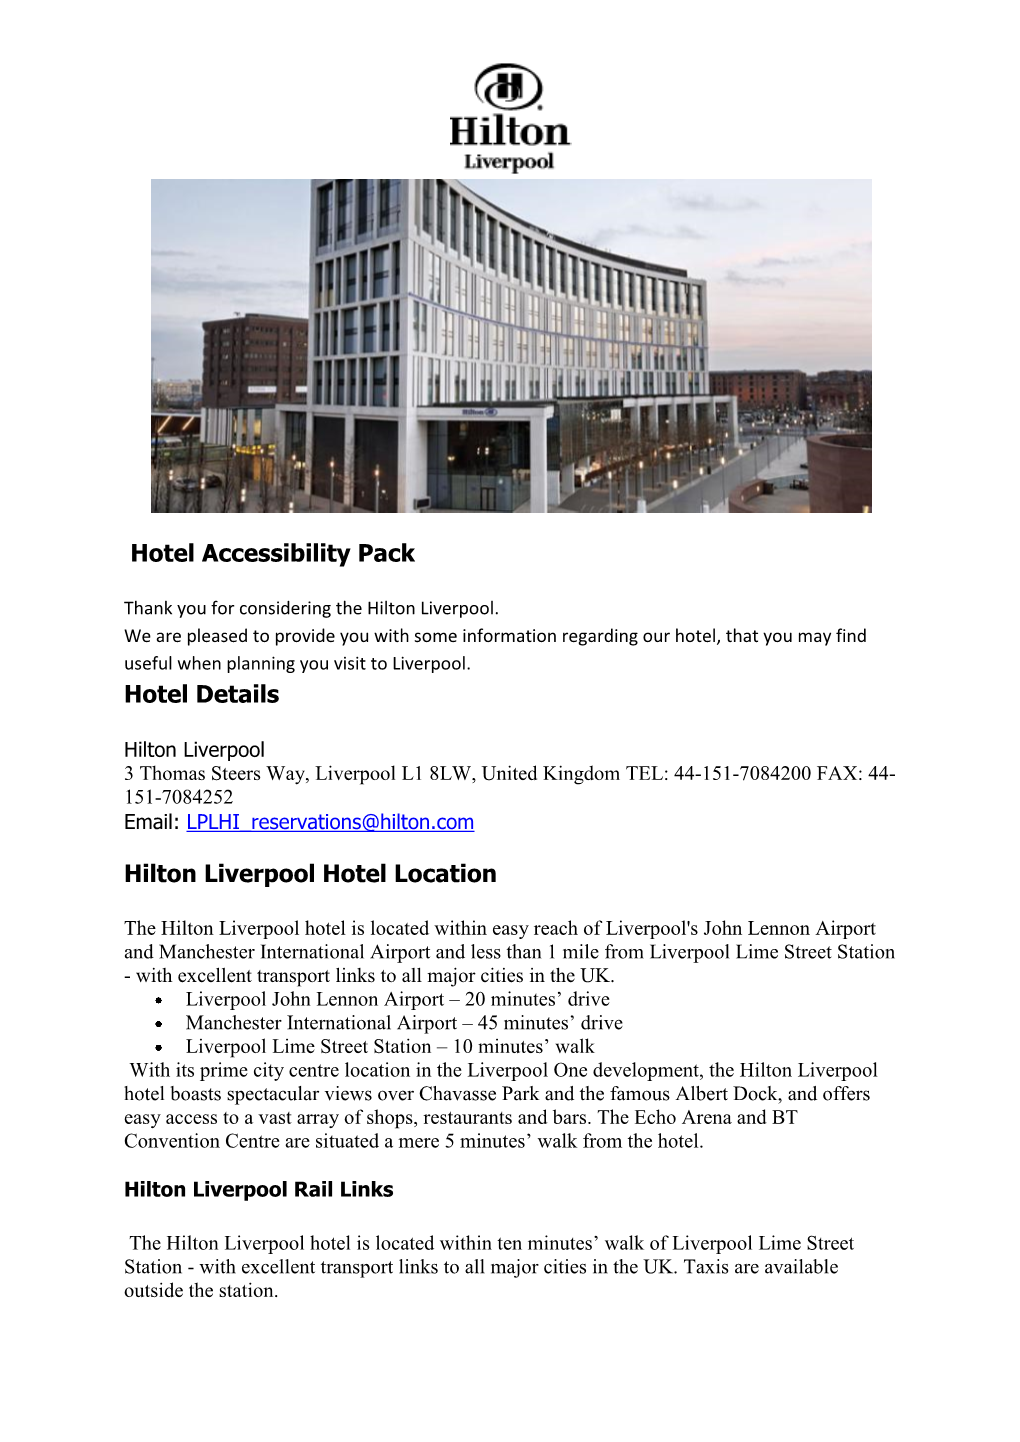 Hotel Accessibility Pack Hotel Details Hilton Liverpool Hotel Location